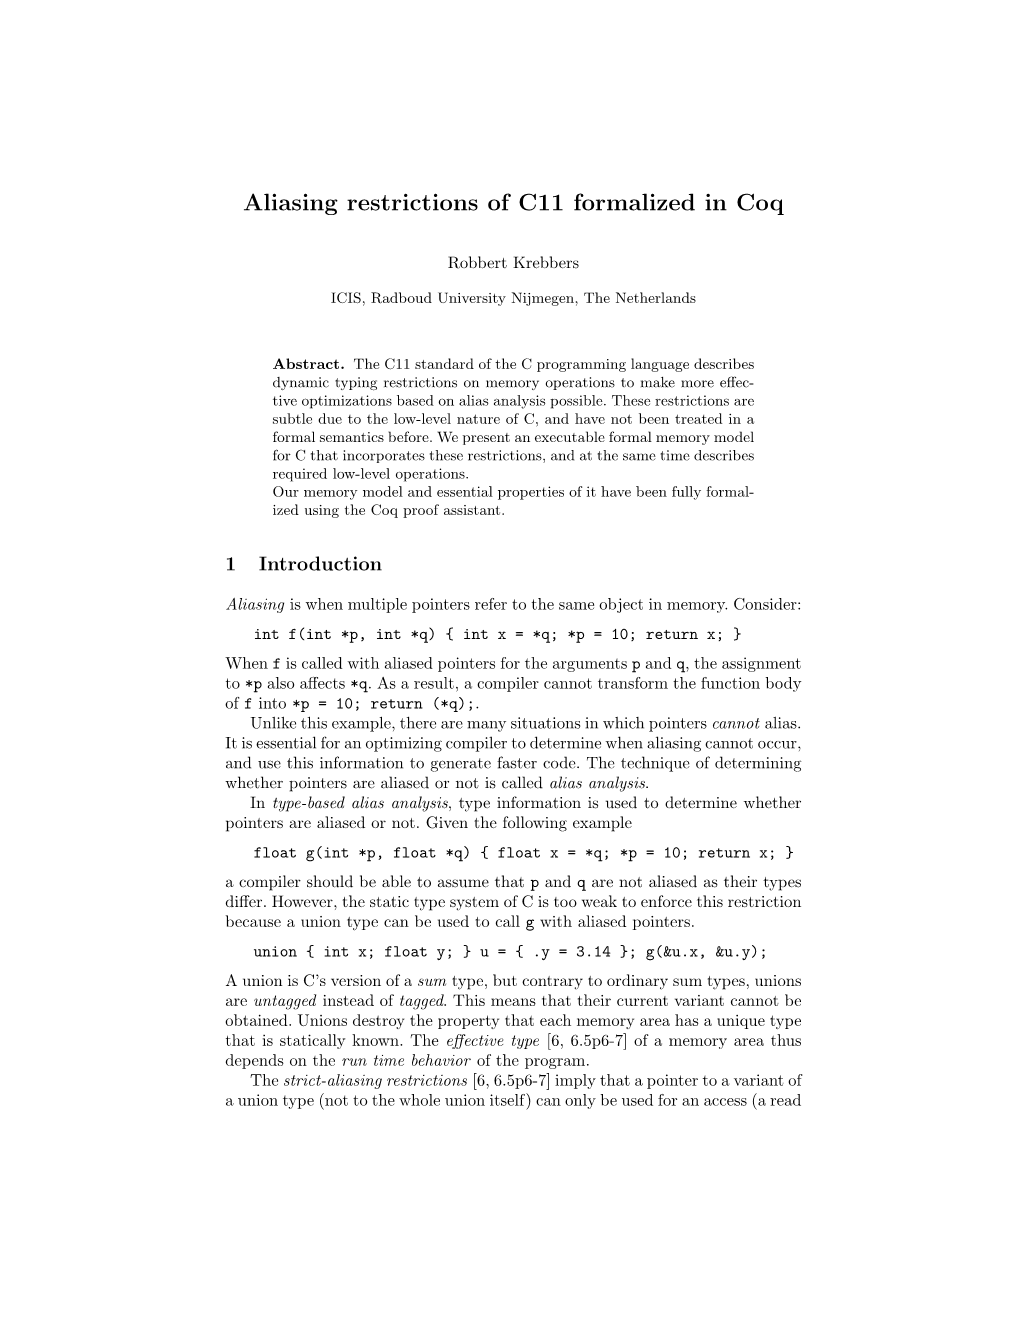 Aliasing Restrictions of C11 Formalized in Coq